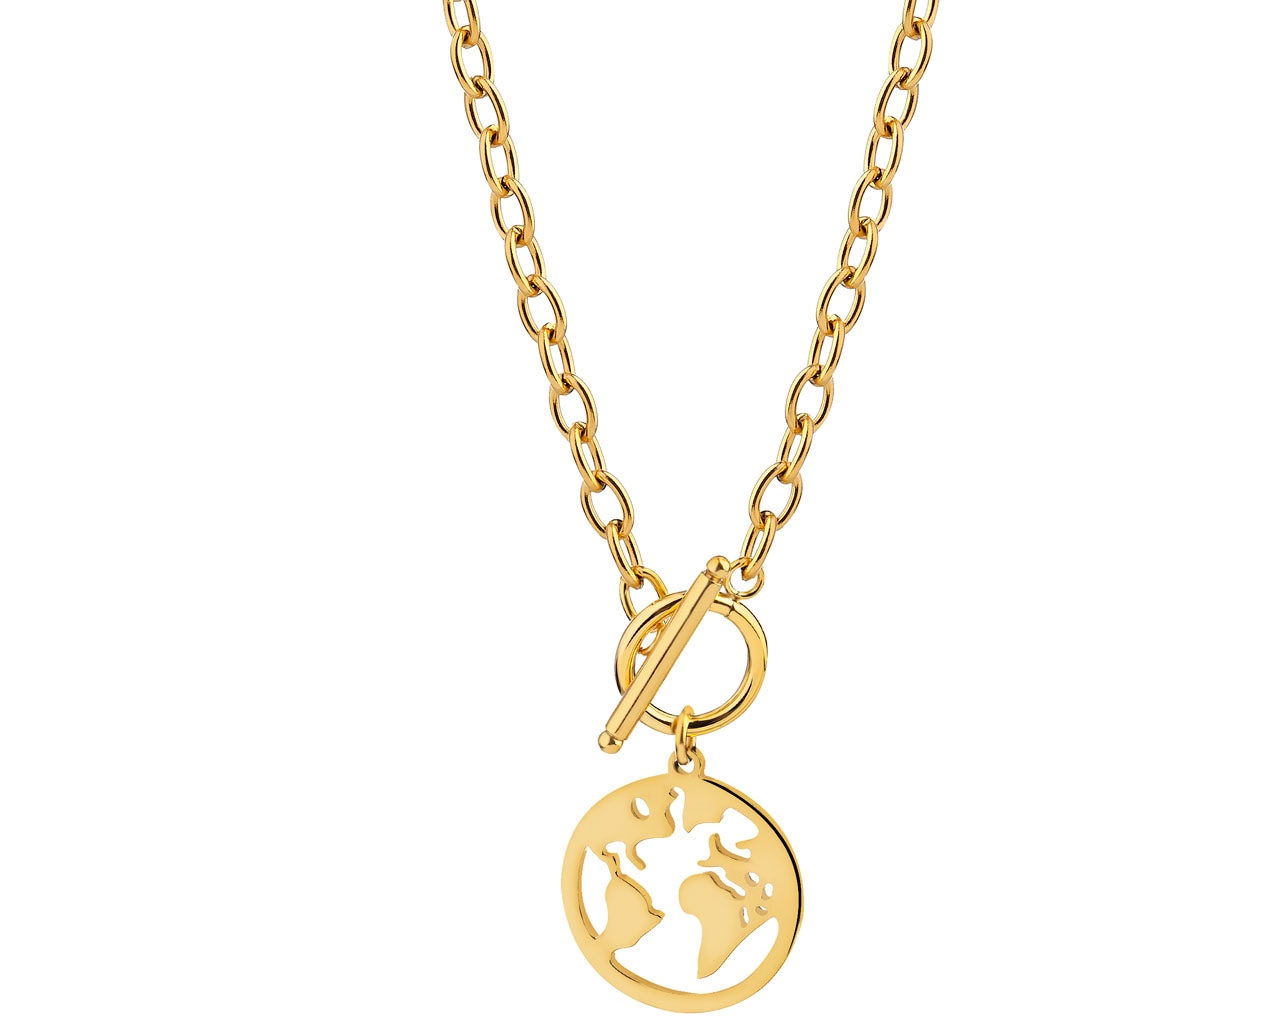 Stainless steel necklace - globe